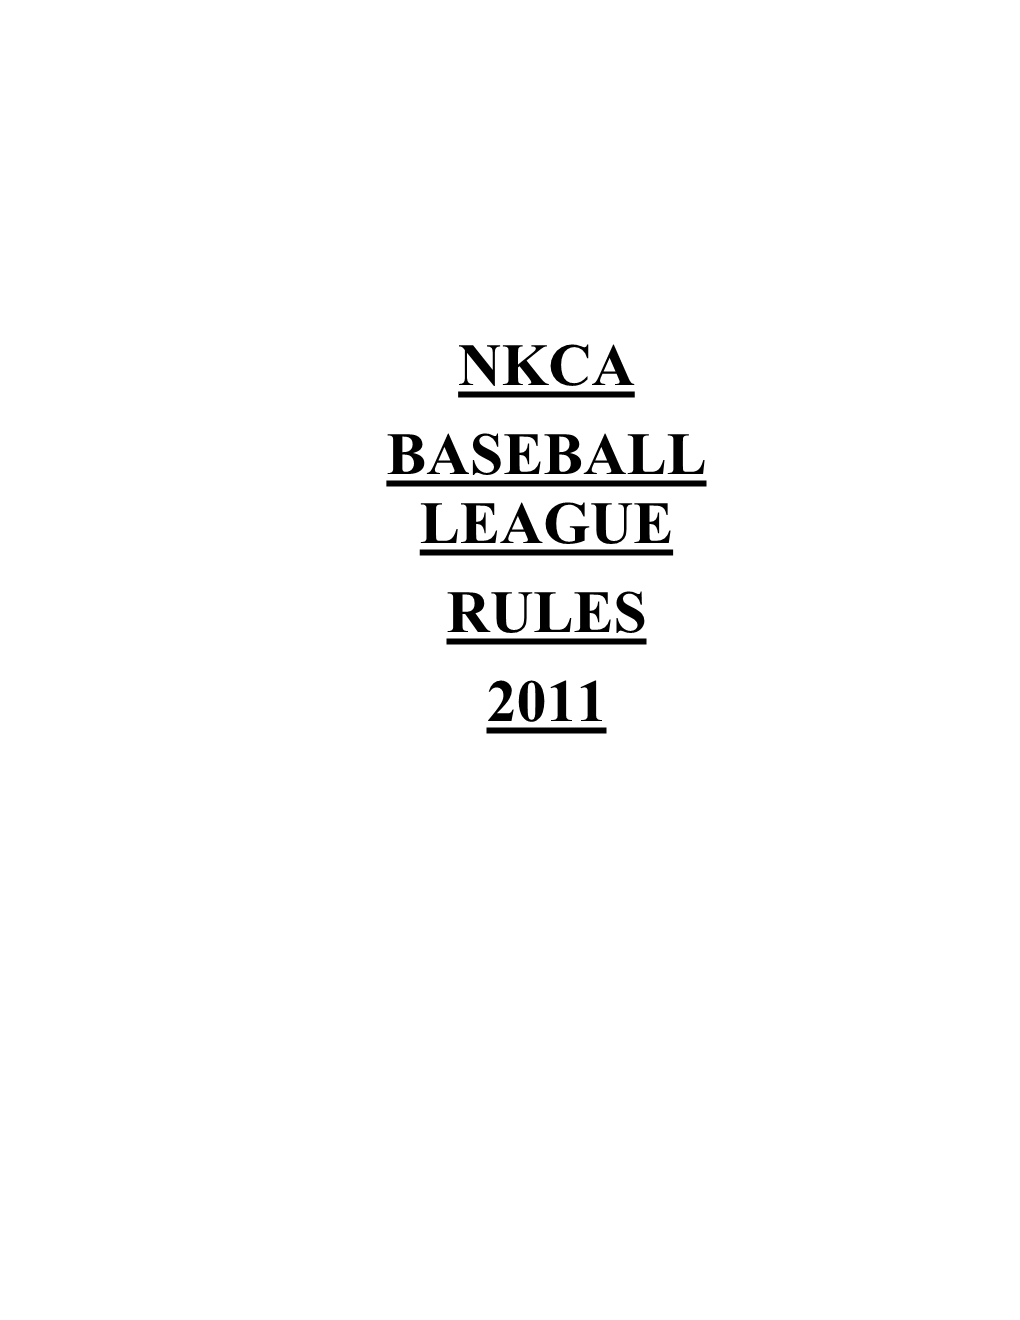 The Nkca Baseball League Will Use the Official Rules of Baseball Unless Otherwise Stated in the Following Rules